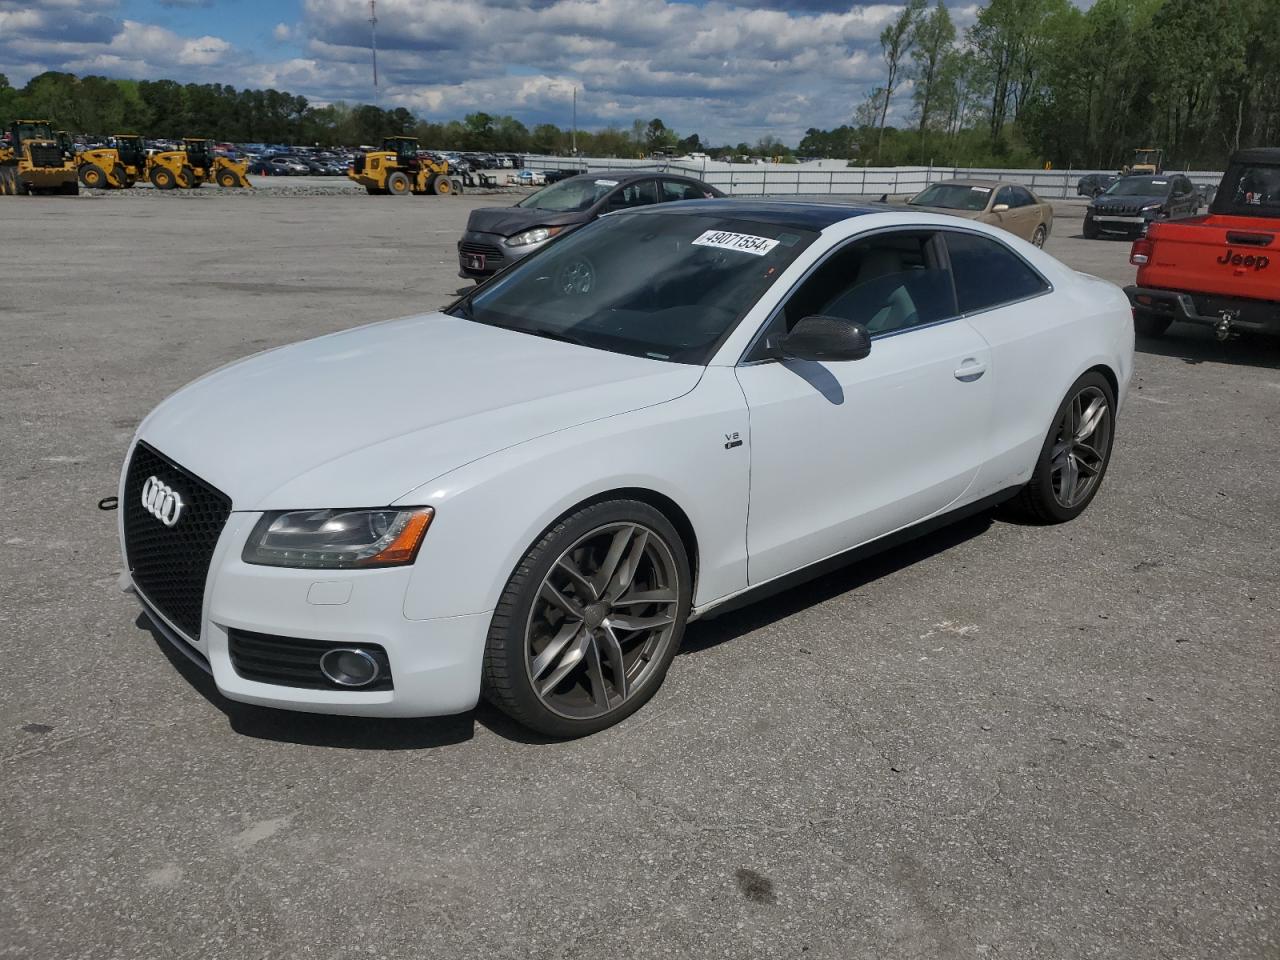 VIN: WAUVVAFR5CA013745 - audi rs5